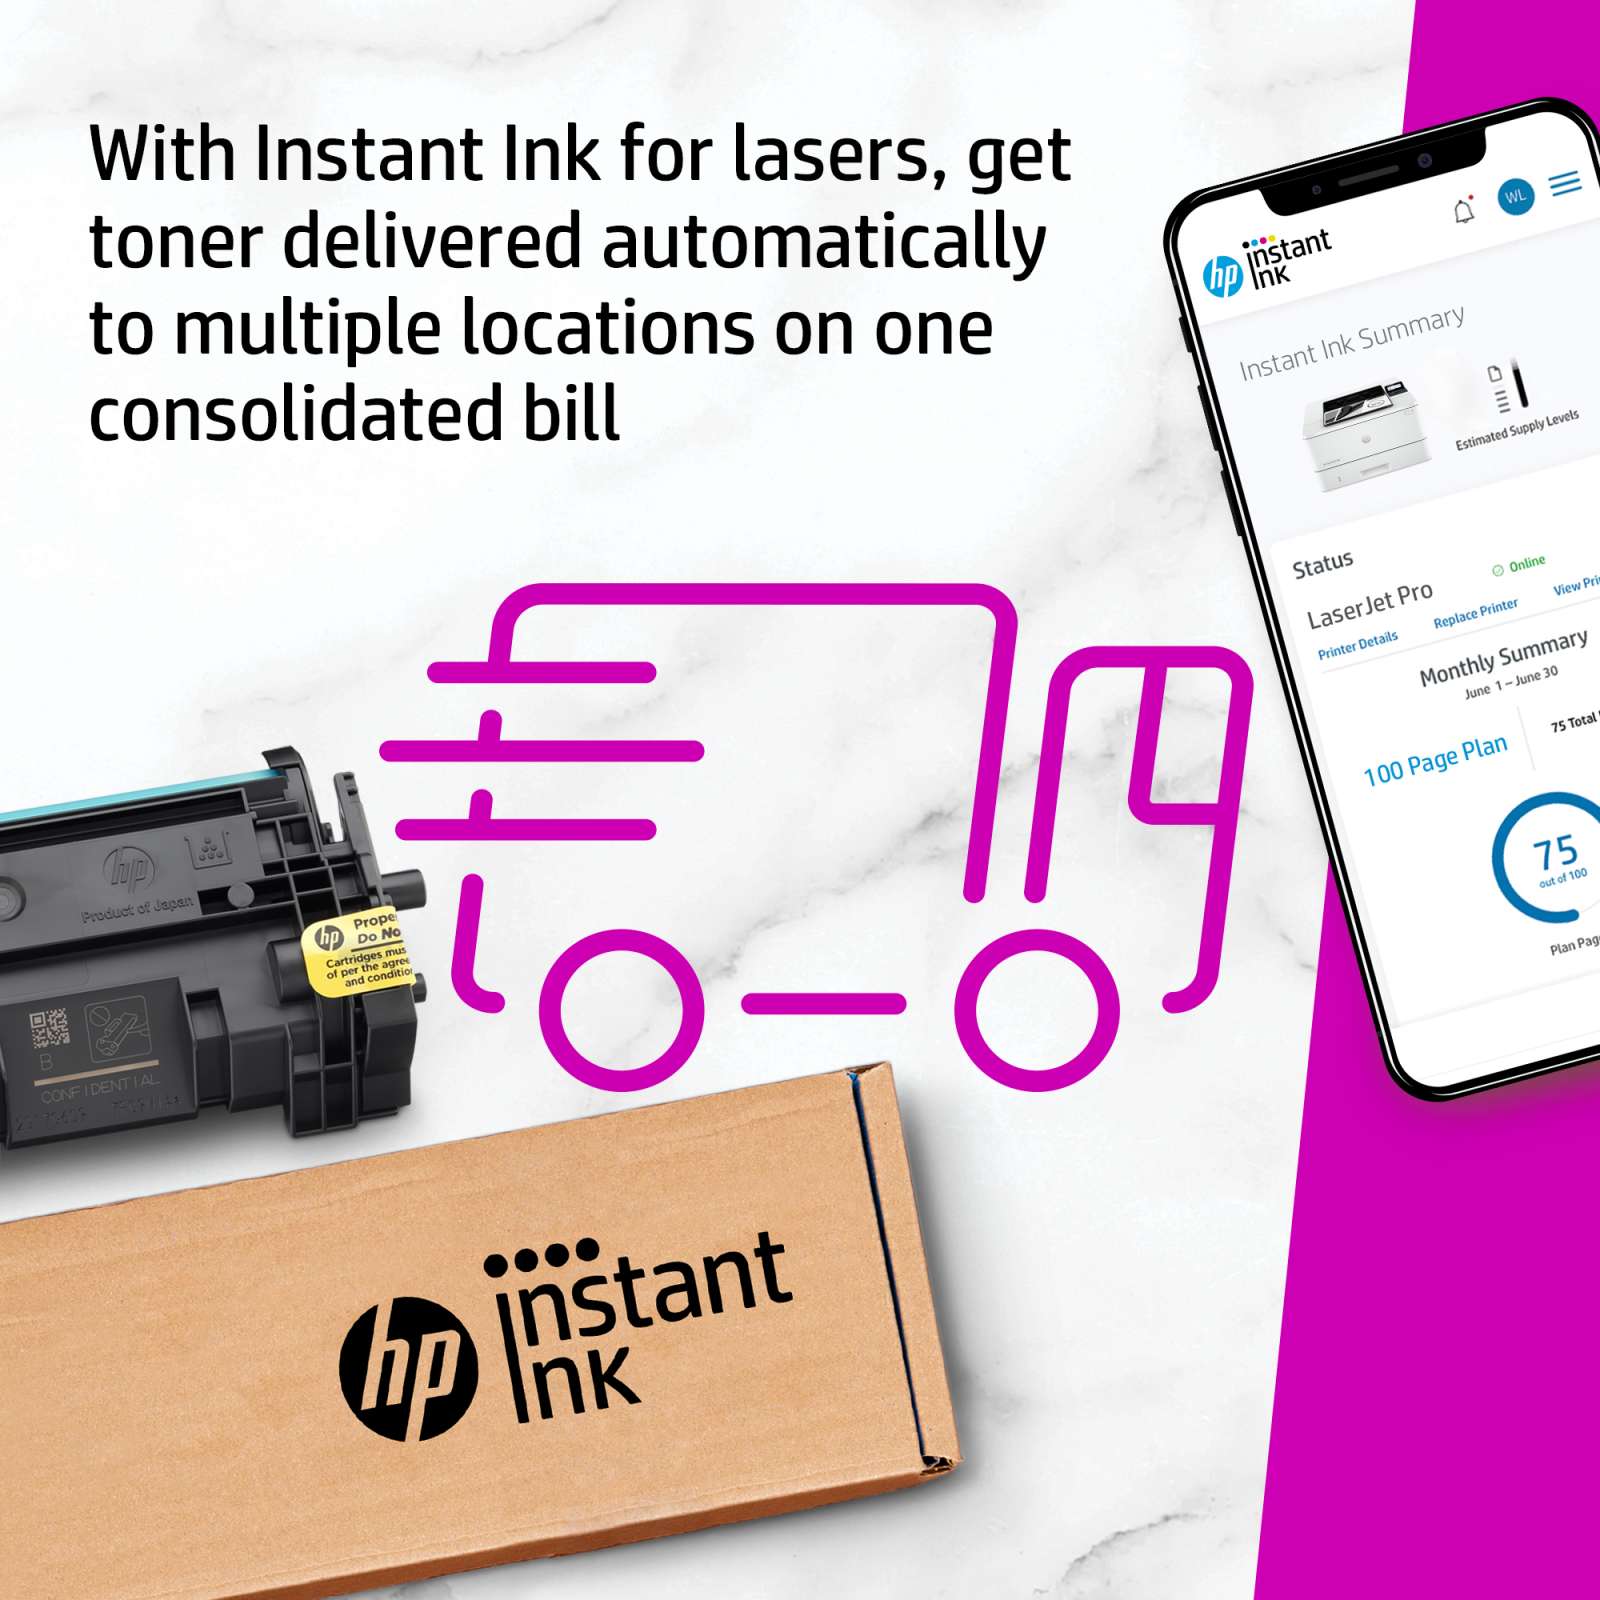 Never run out of high-quality #toner cartridges again! RT to hear about @HP Instant Ink, the convenient toner subscription service that delivers cartridges to multiple locations while consolidating them on one bill.